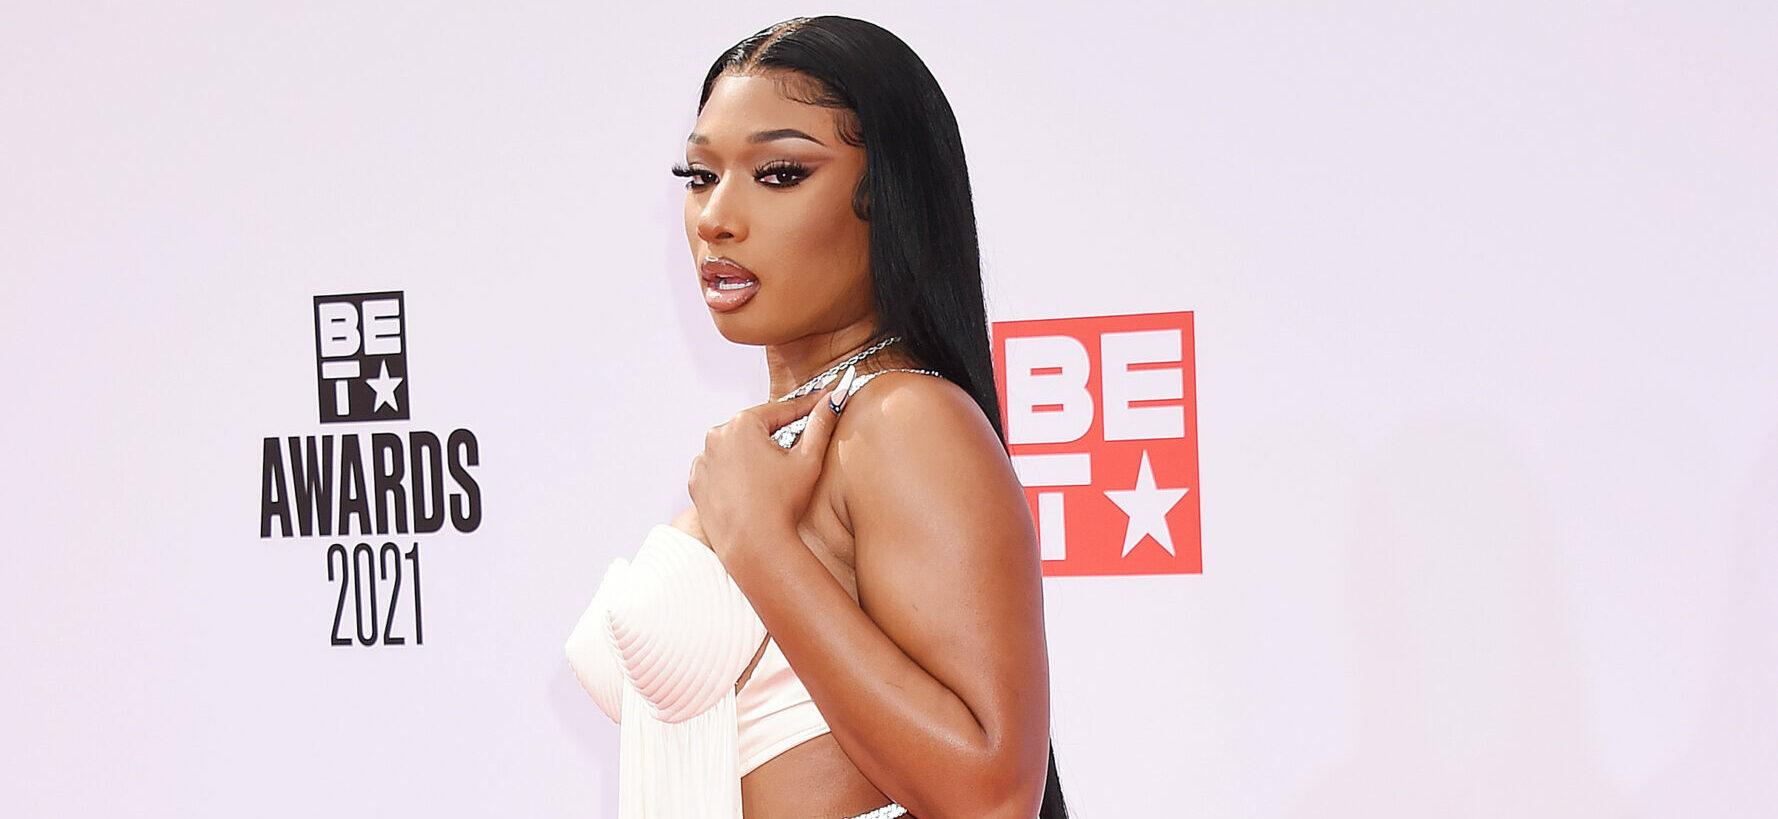 Megan Thee Stallion Flaunts Stretch Marks & Pert Assets In Cut-Out Bodysuit